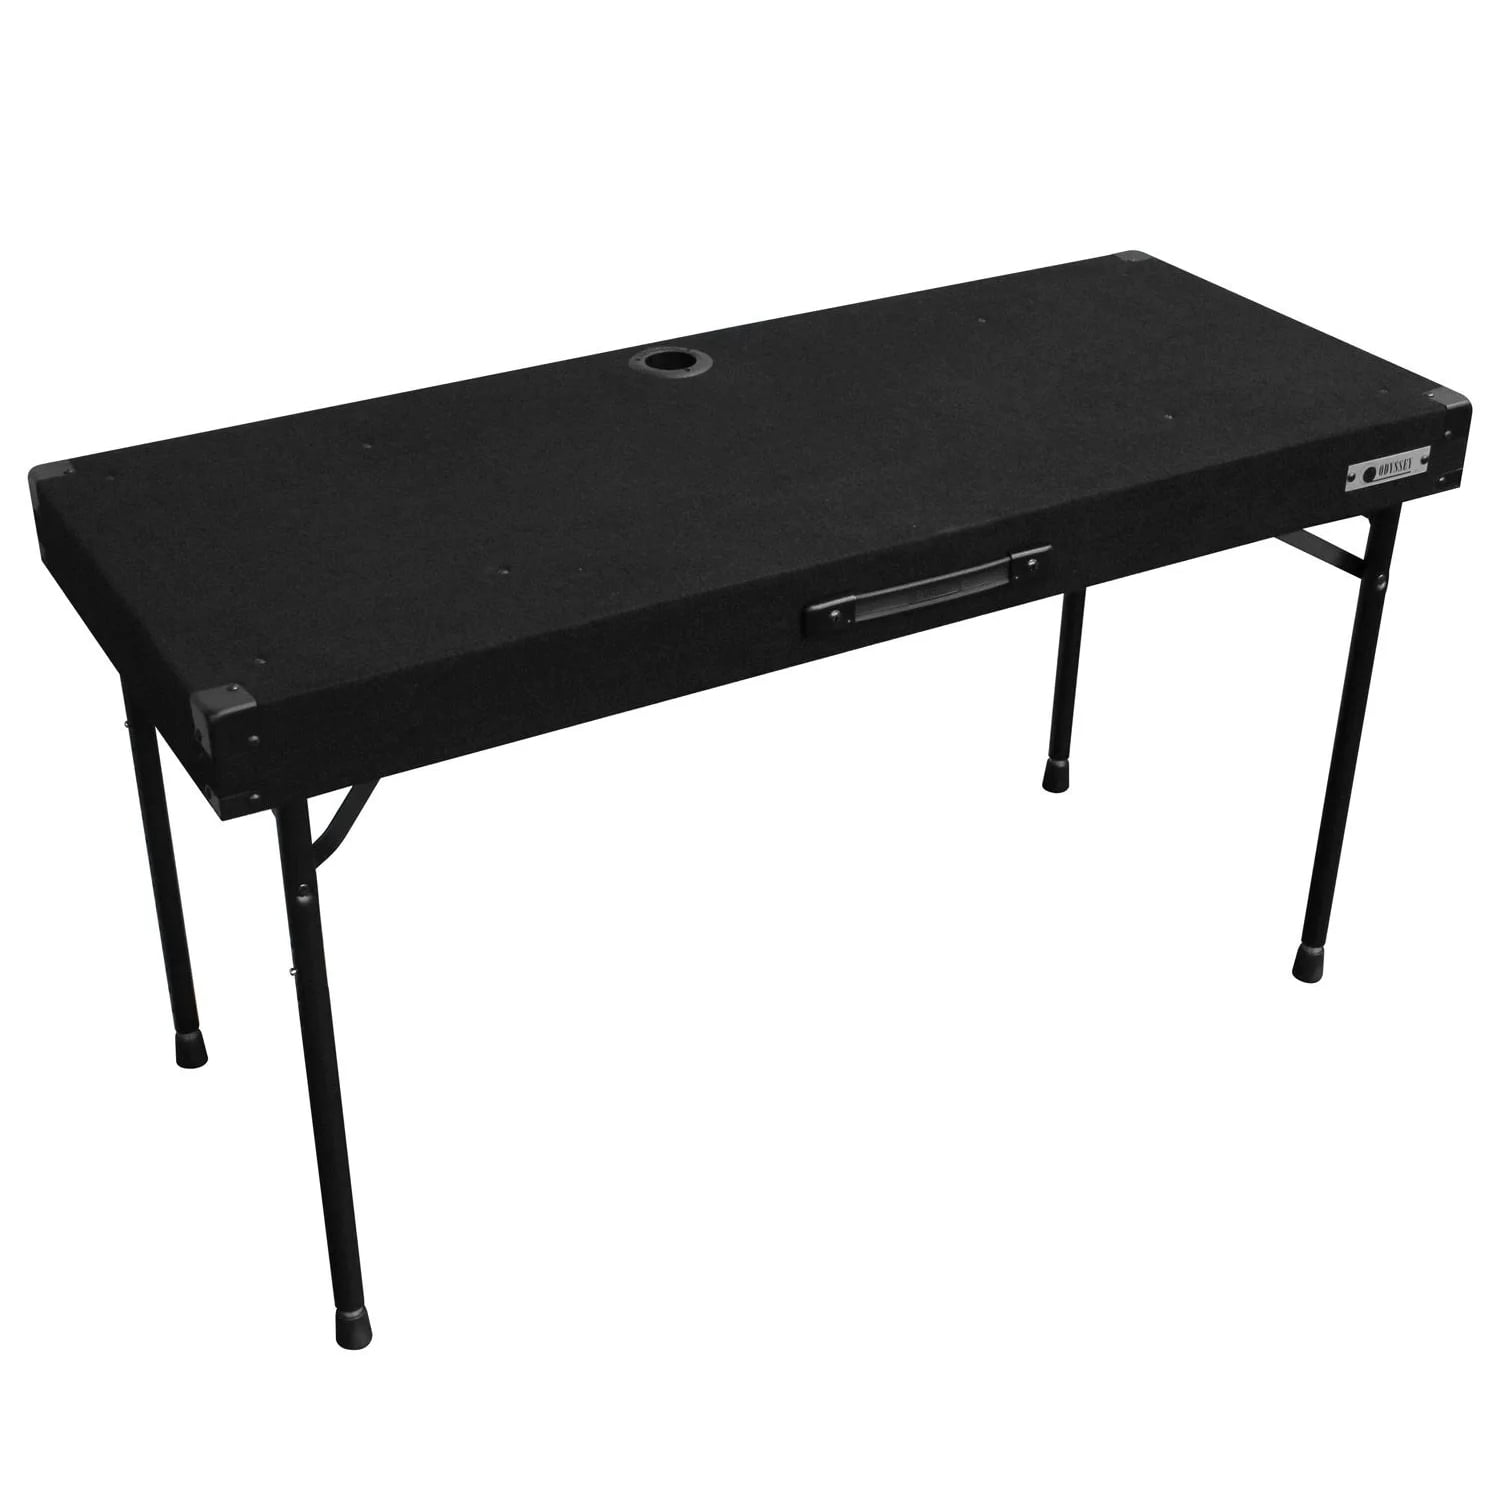 4'X8' CARPETED DJ PLATFORM 16 HIGH - COMES WITH 30 HIGH FOLDING TABLE